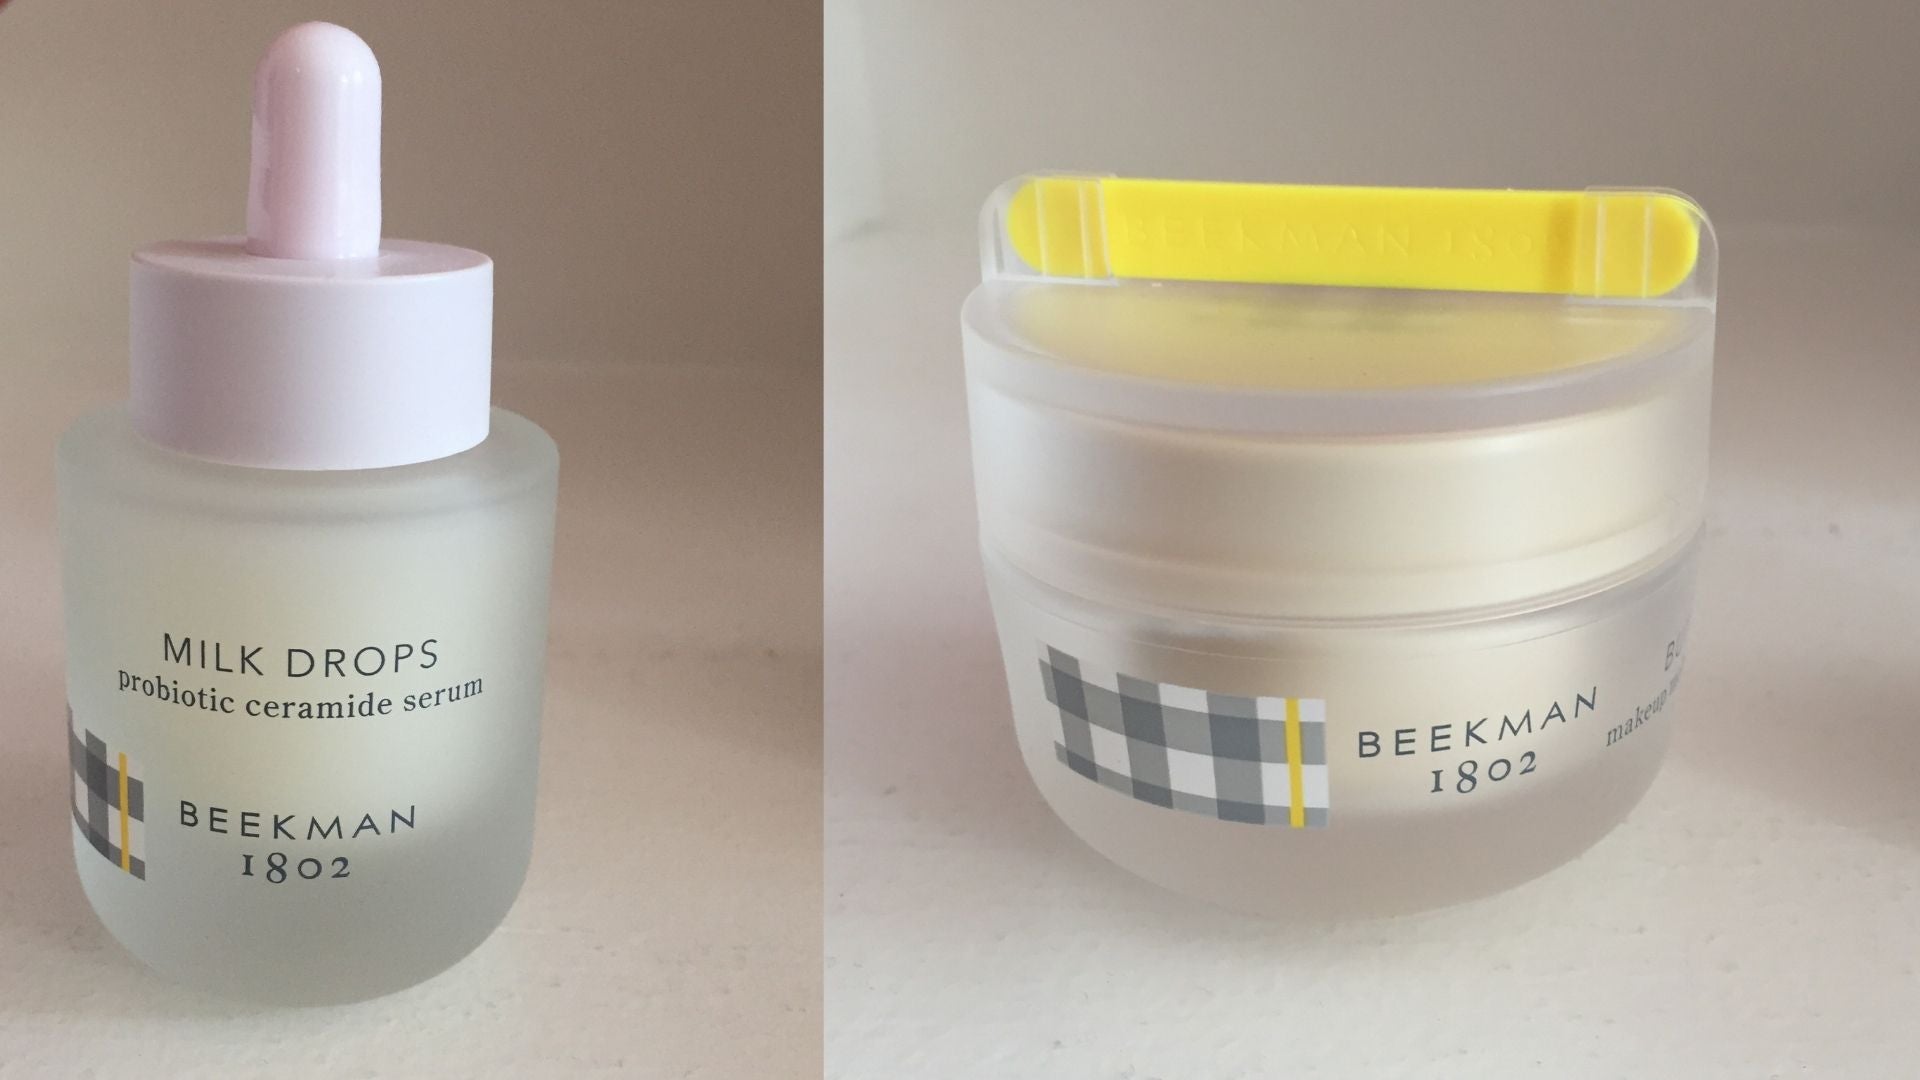 skincare, review, ingredients, photos, trends, 2020, 2021, beekman 1802, skincare products, buttermilk makeup melting cleansing balm, bloom cream daily probiotic moisturizer, milk drops probiotic ceramide serum